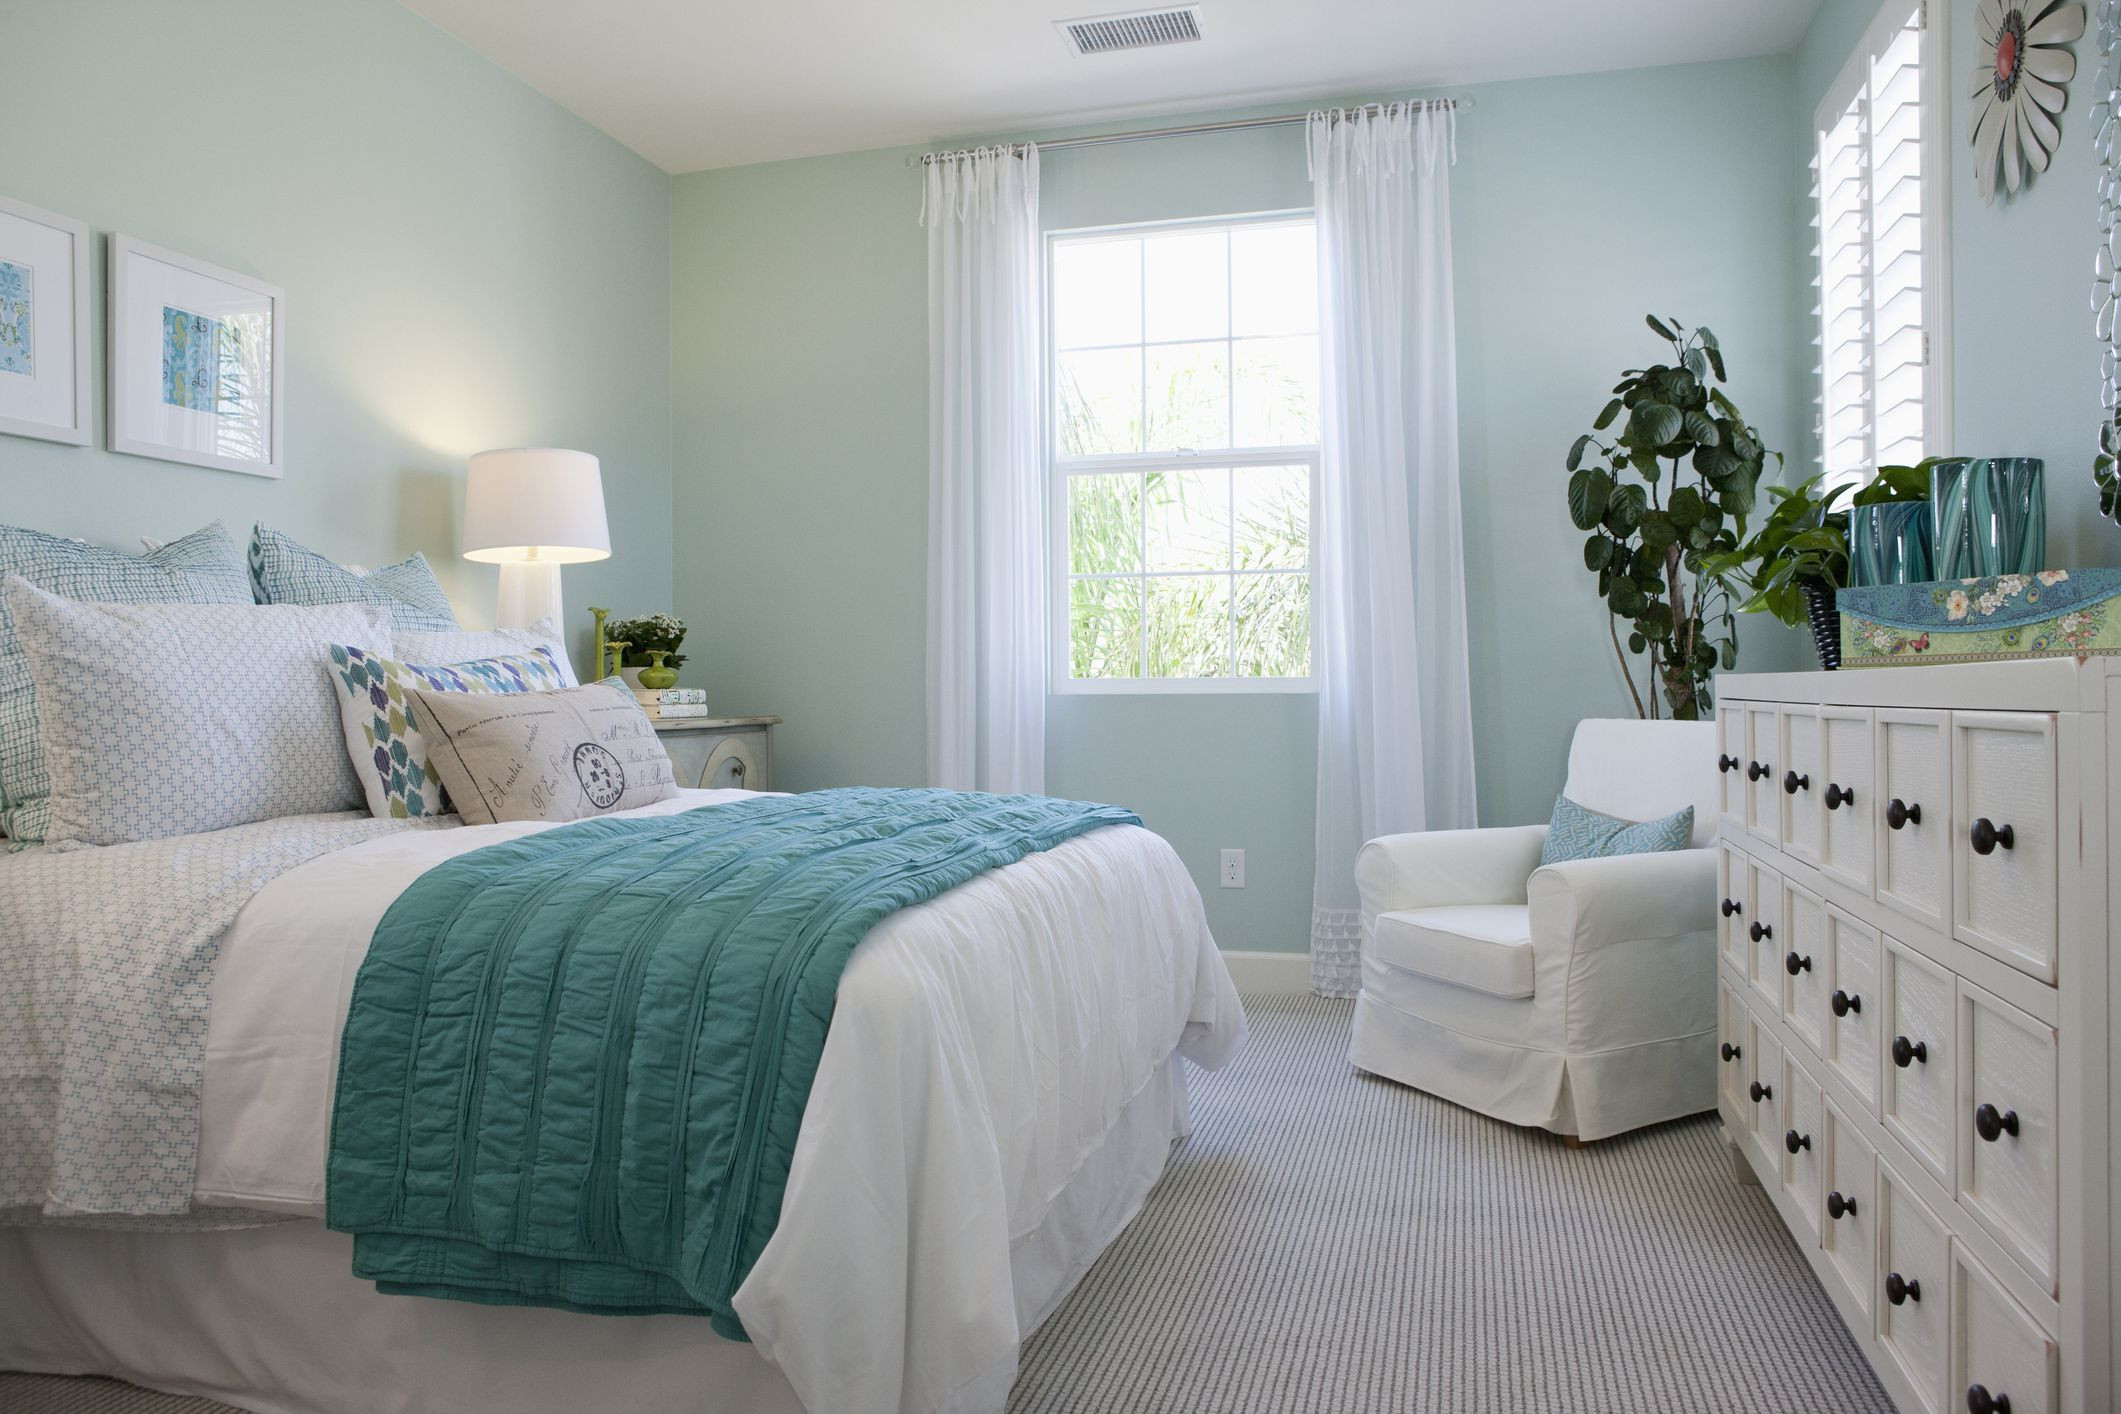 Bedroom Paint Color
 How to Choose the Right Paint Colors for Your Bedroom